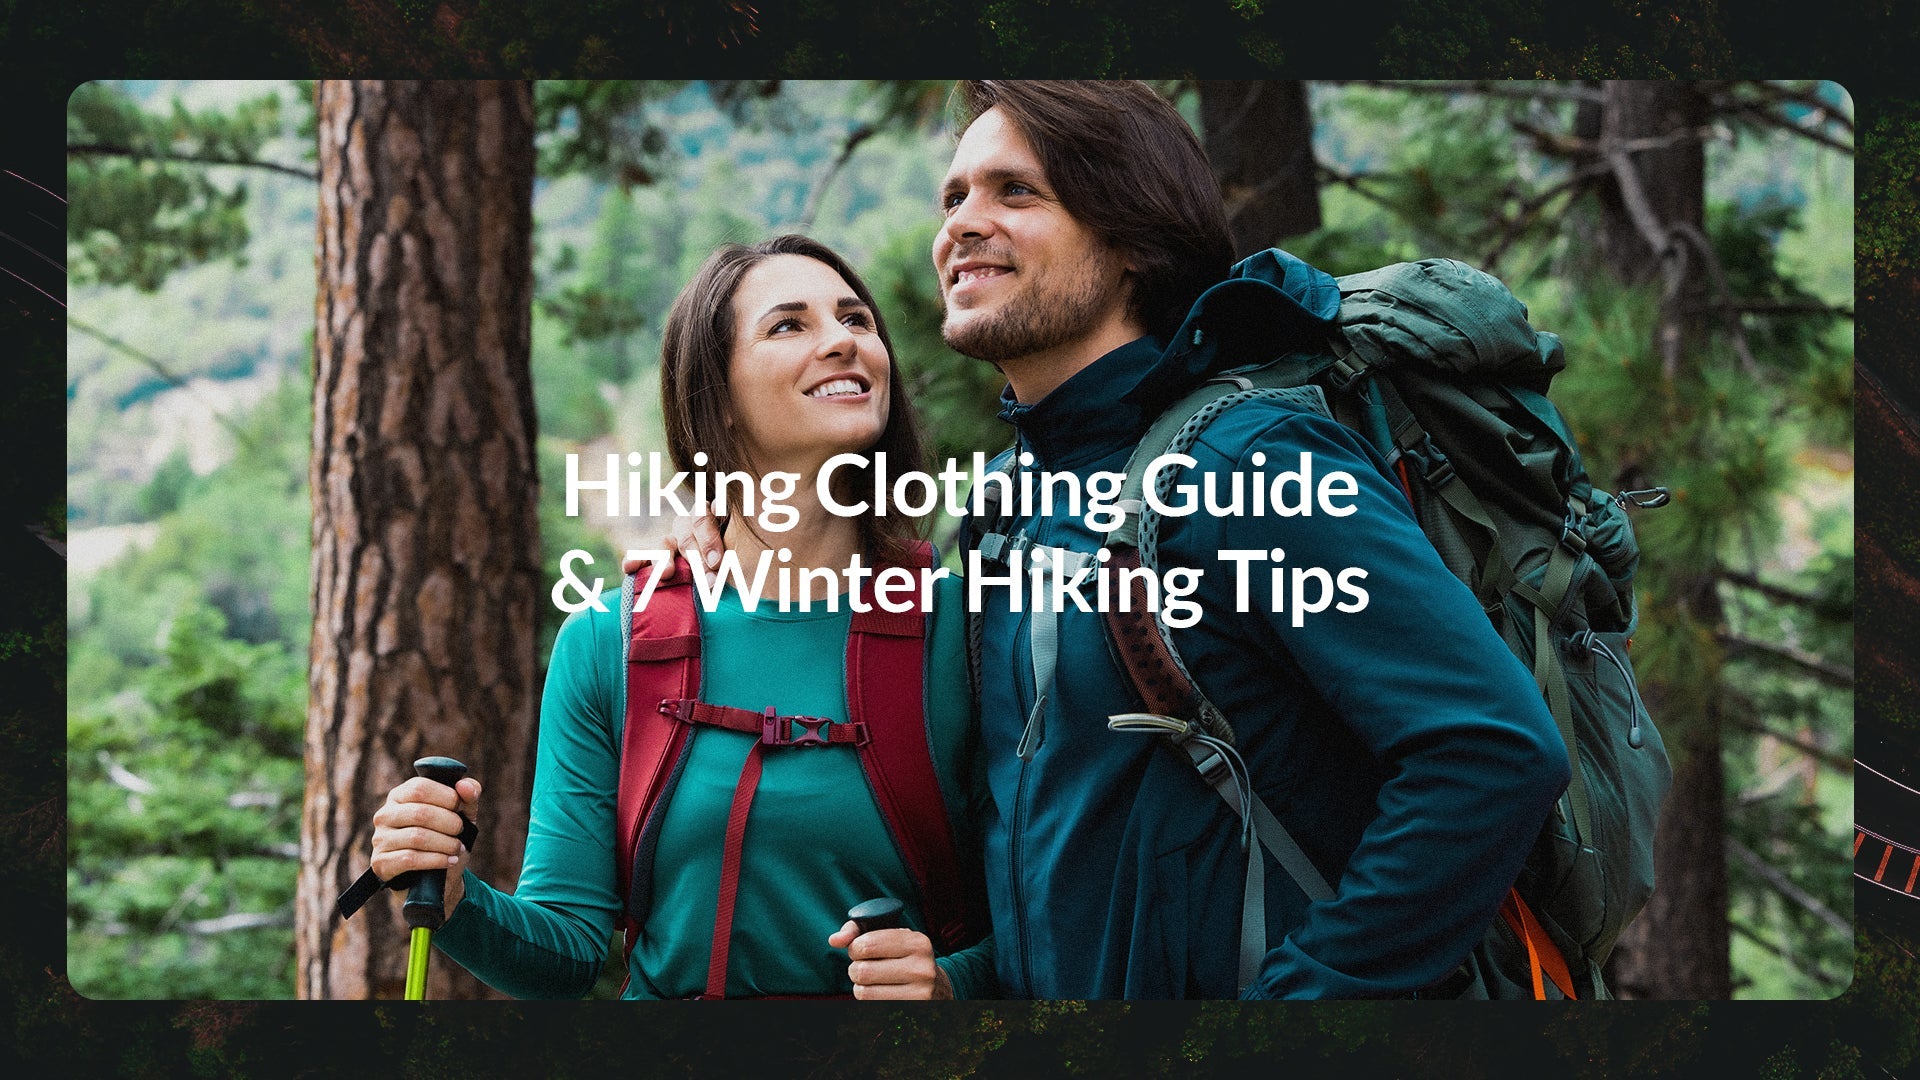 Hiking Clothing Guide & 7 Winter Hiking Tips